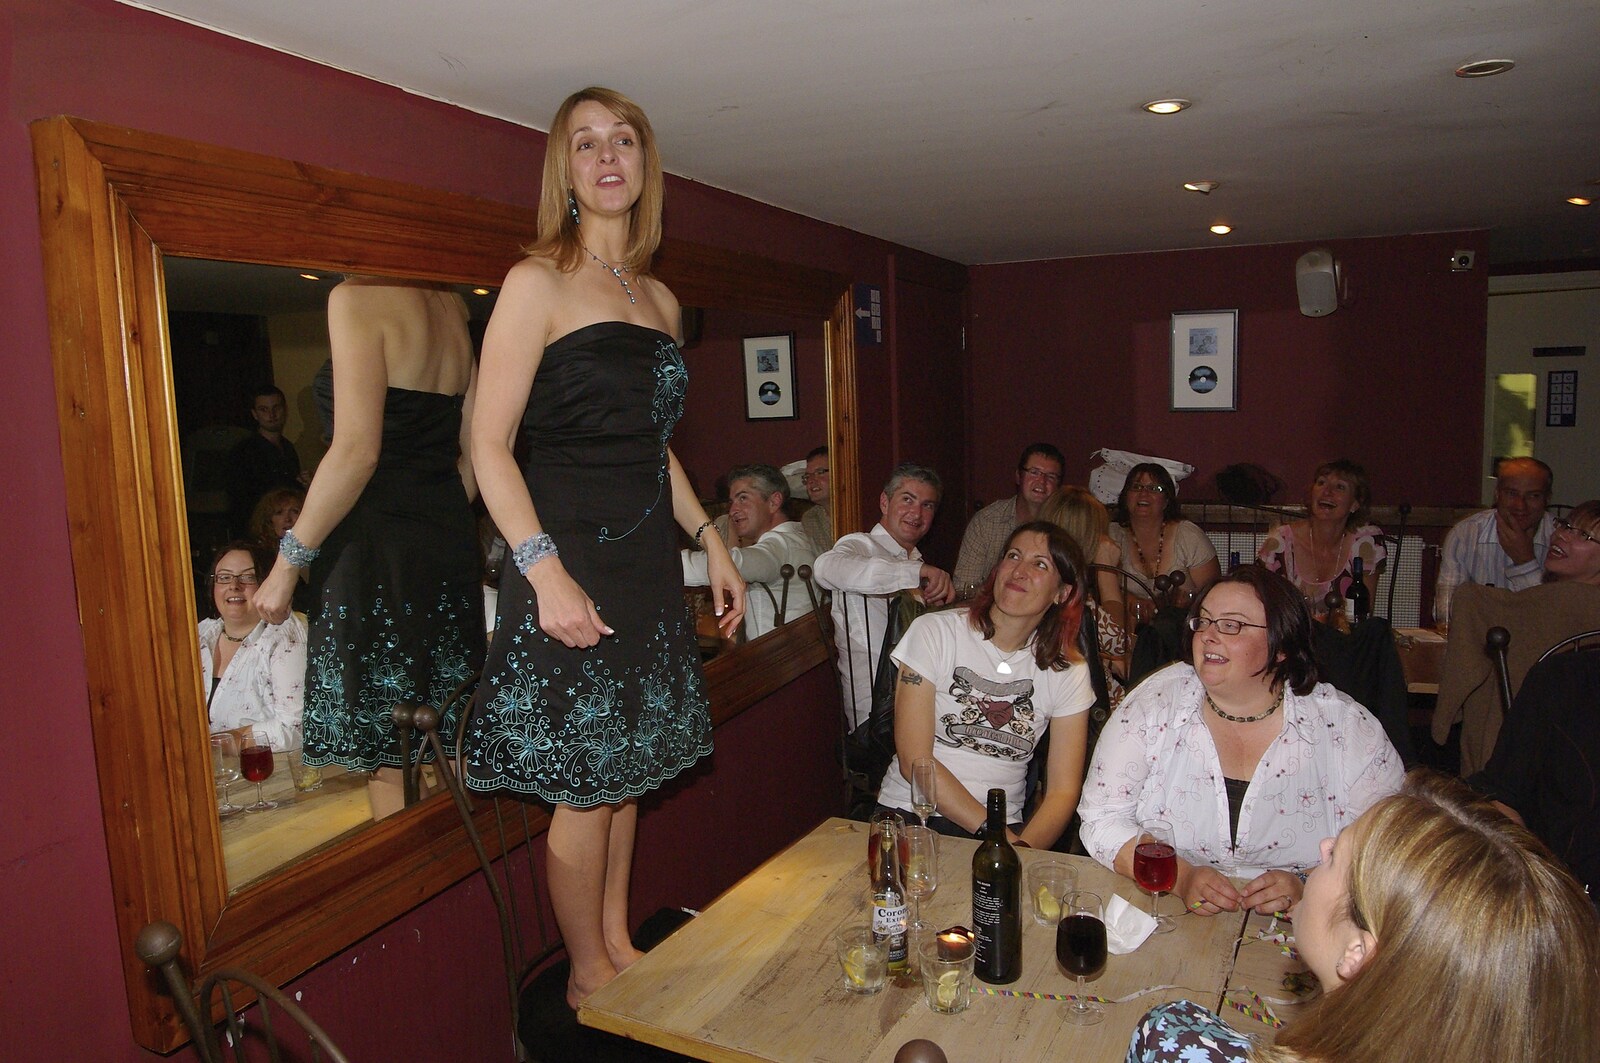 Janet's 40th, The Depot, Cambridge - 1st September 2007: Janet stands up on a chair to give a speech